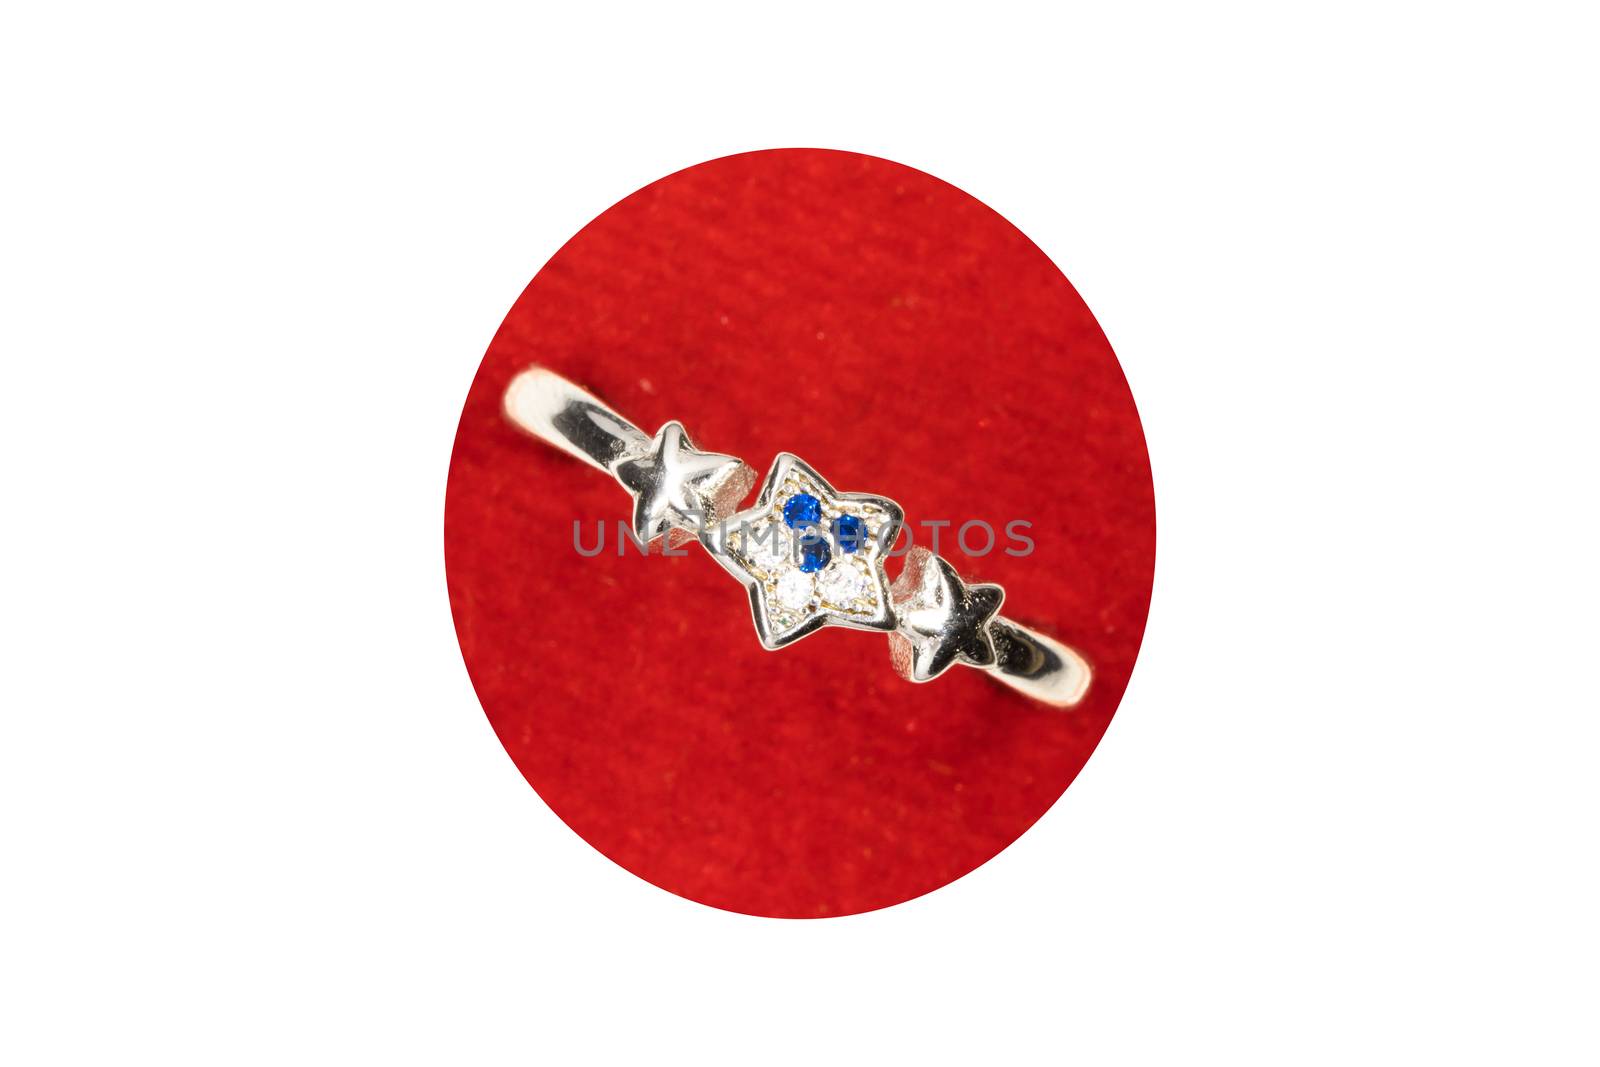 three stars with 3 blue and white stones crystal designer ring Valentine Gift for girls and women by 9500102400